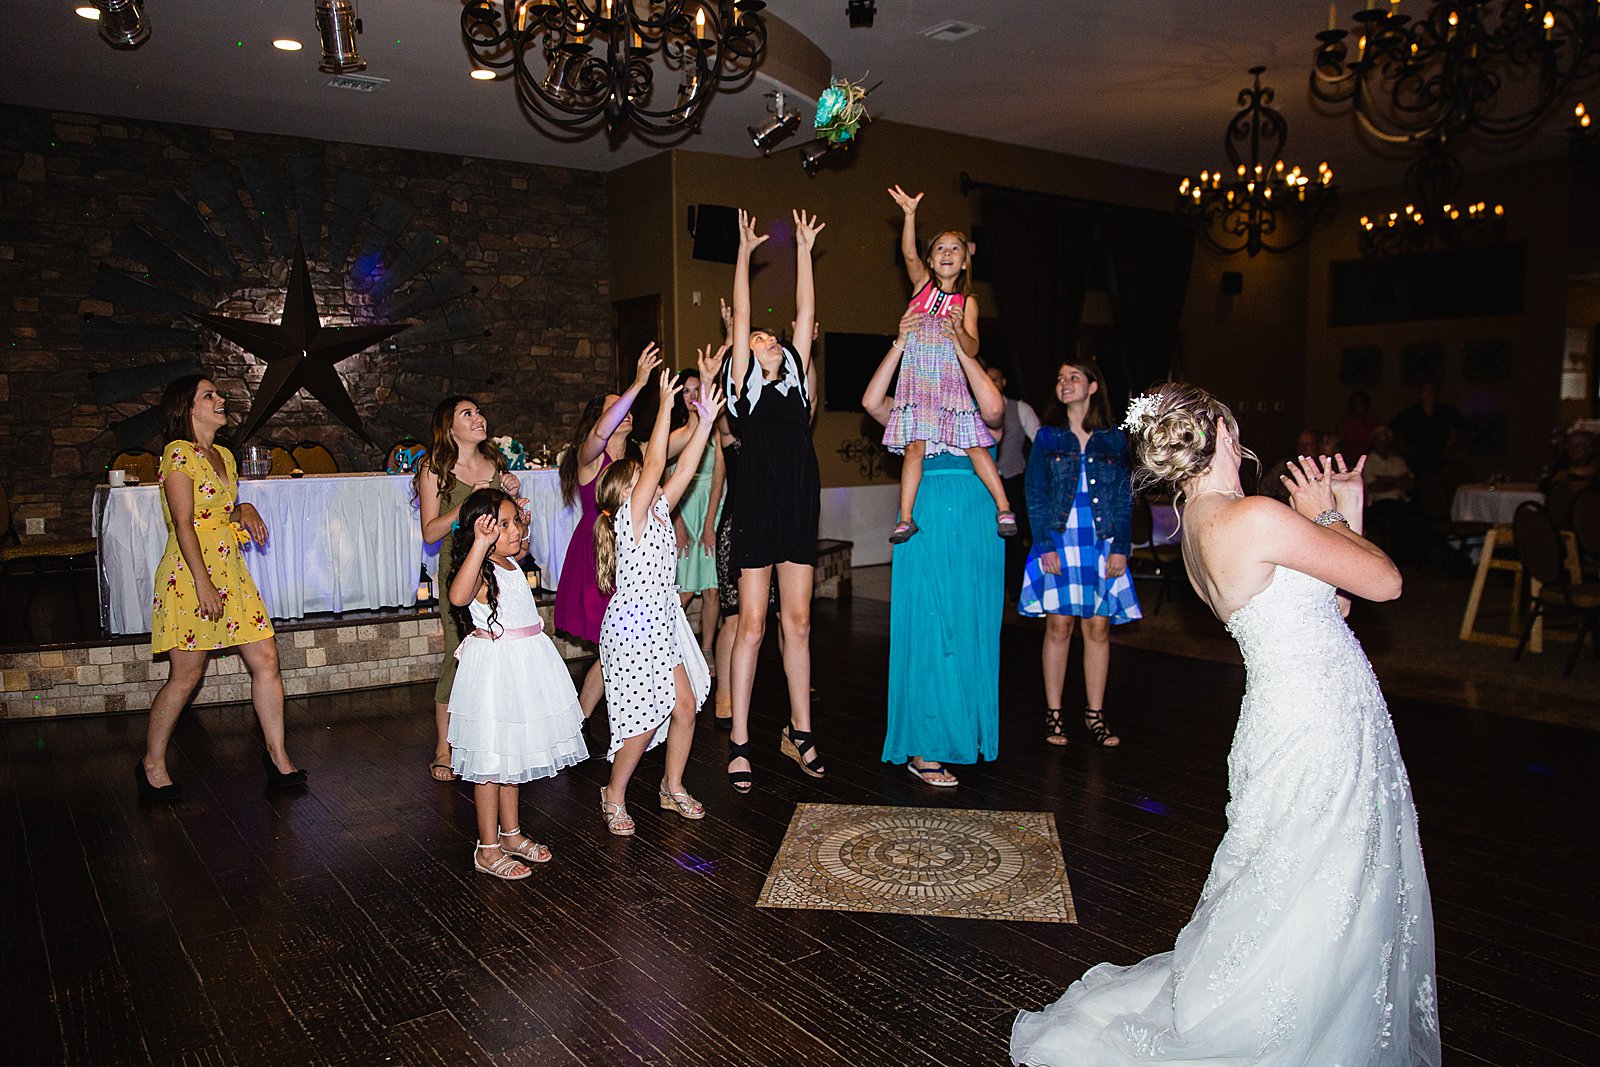 Bouquet toss at The Windmill House wedding reception by Chino Valley wedding photographer PMA Photography.